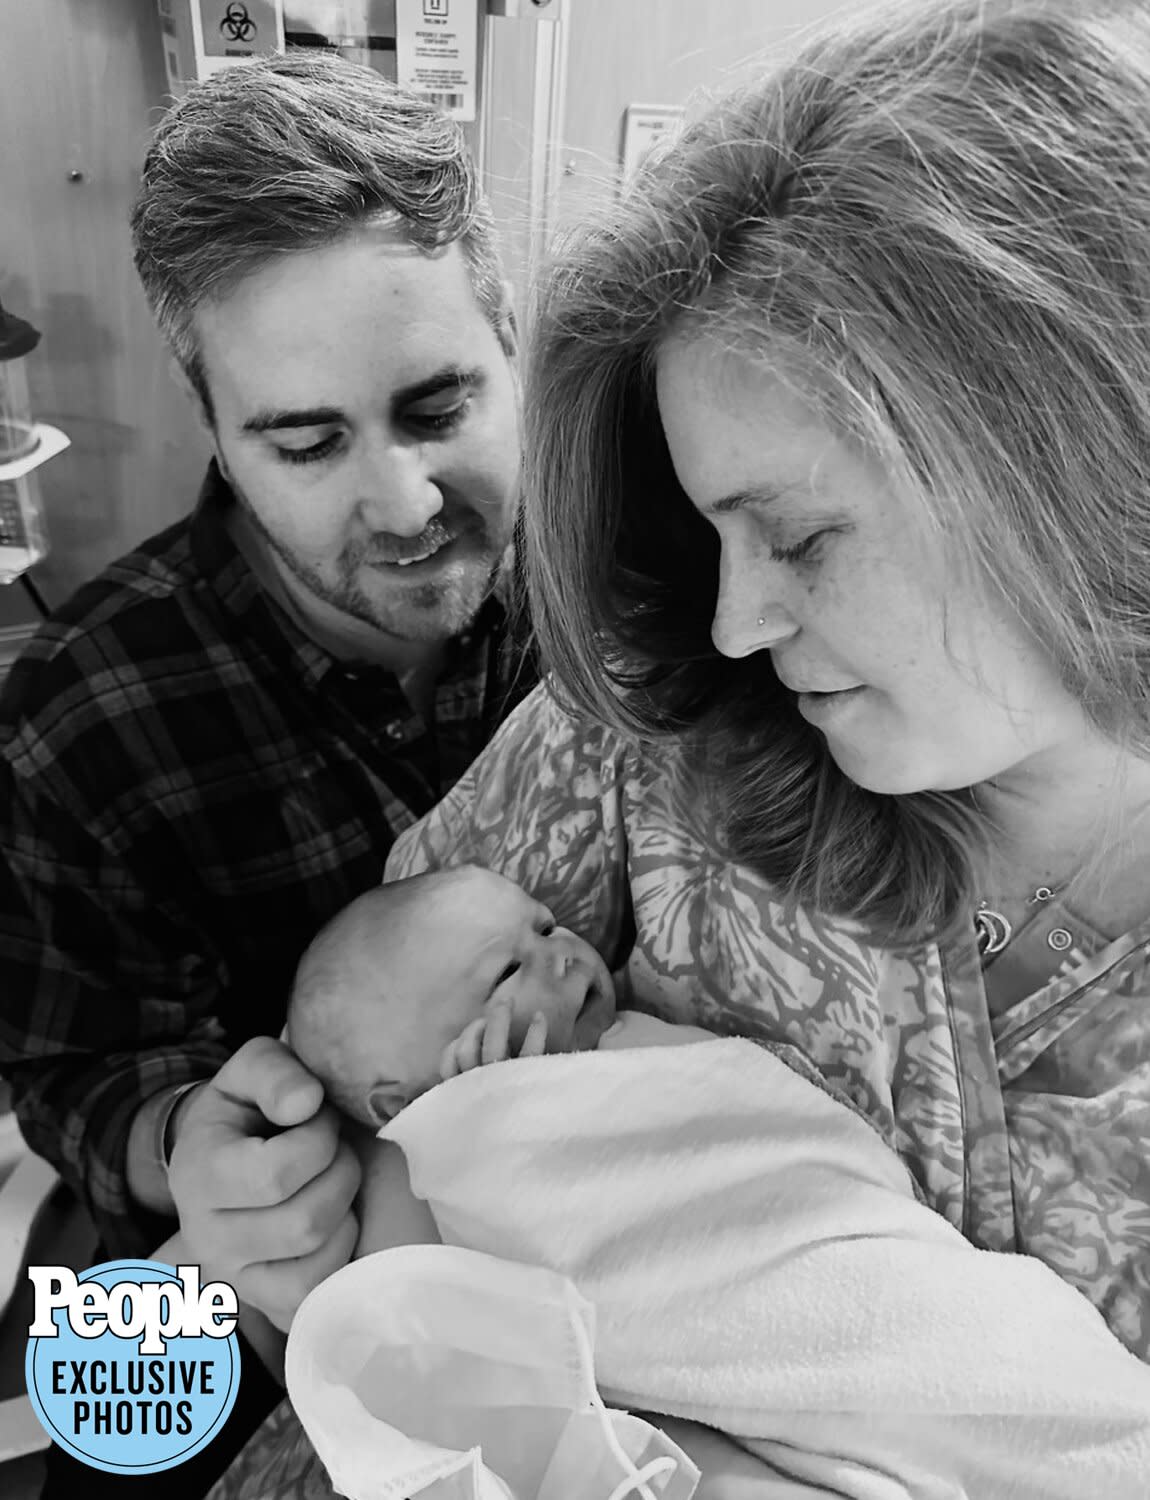 MaryAlice gave birth to Patrick Colby Parks Kimmel on, Saturday, February 25th